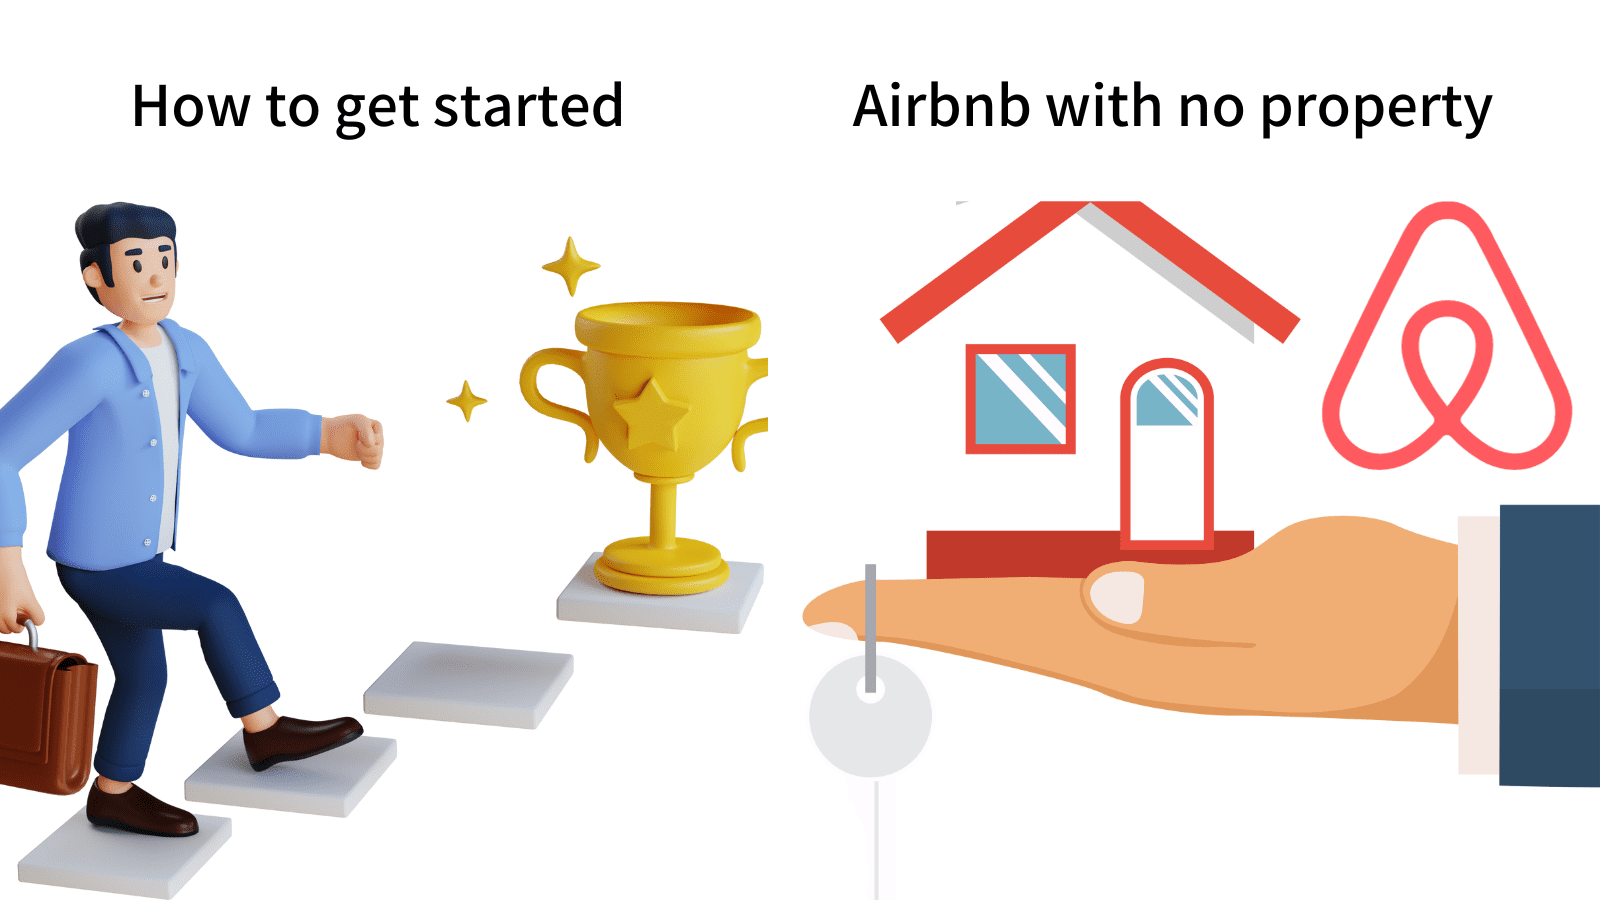 How to get started with airbnb without owning property